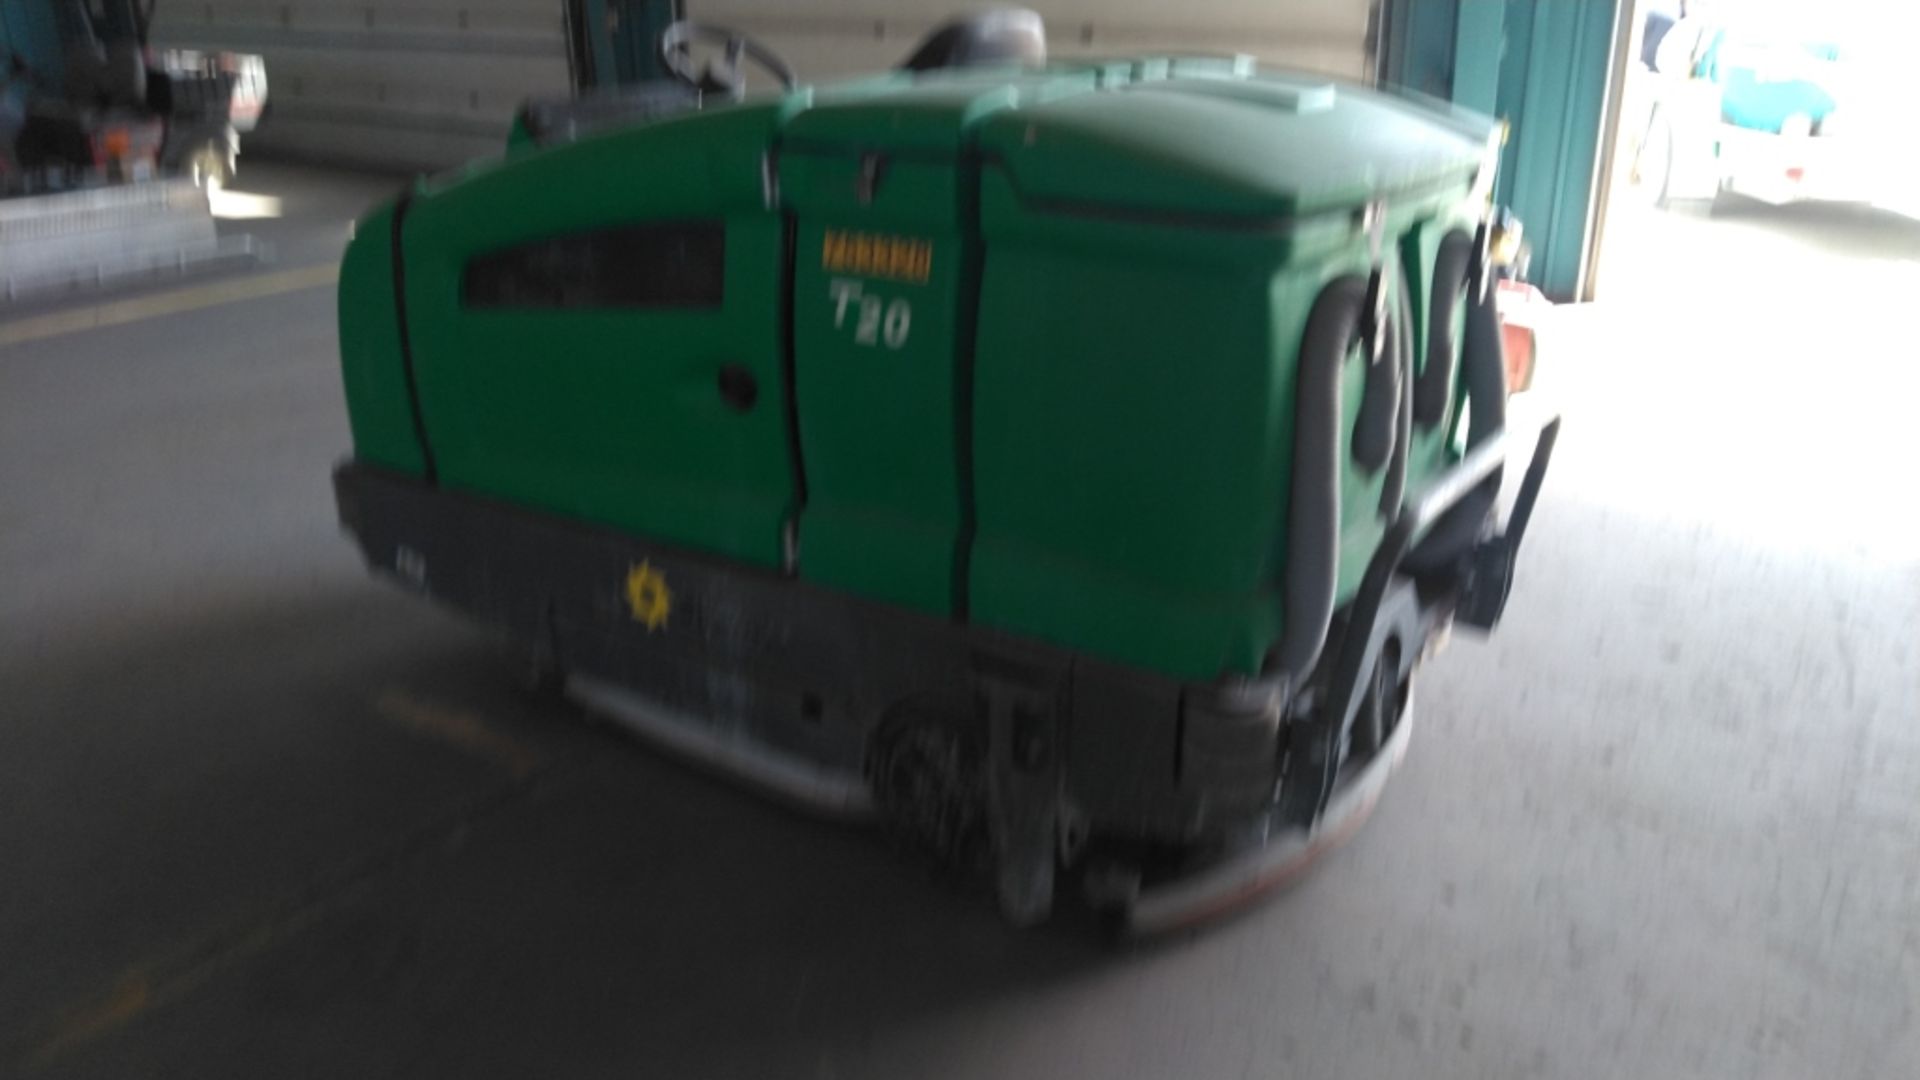 Tennant T20 Ride-On Floor Scrubber-Dryer - Image 5 of 13